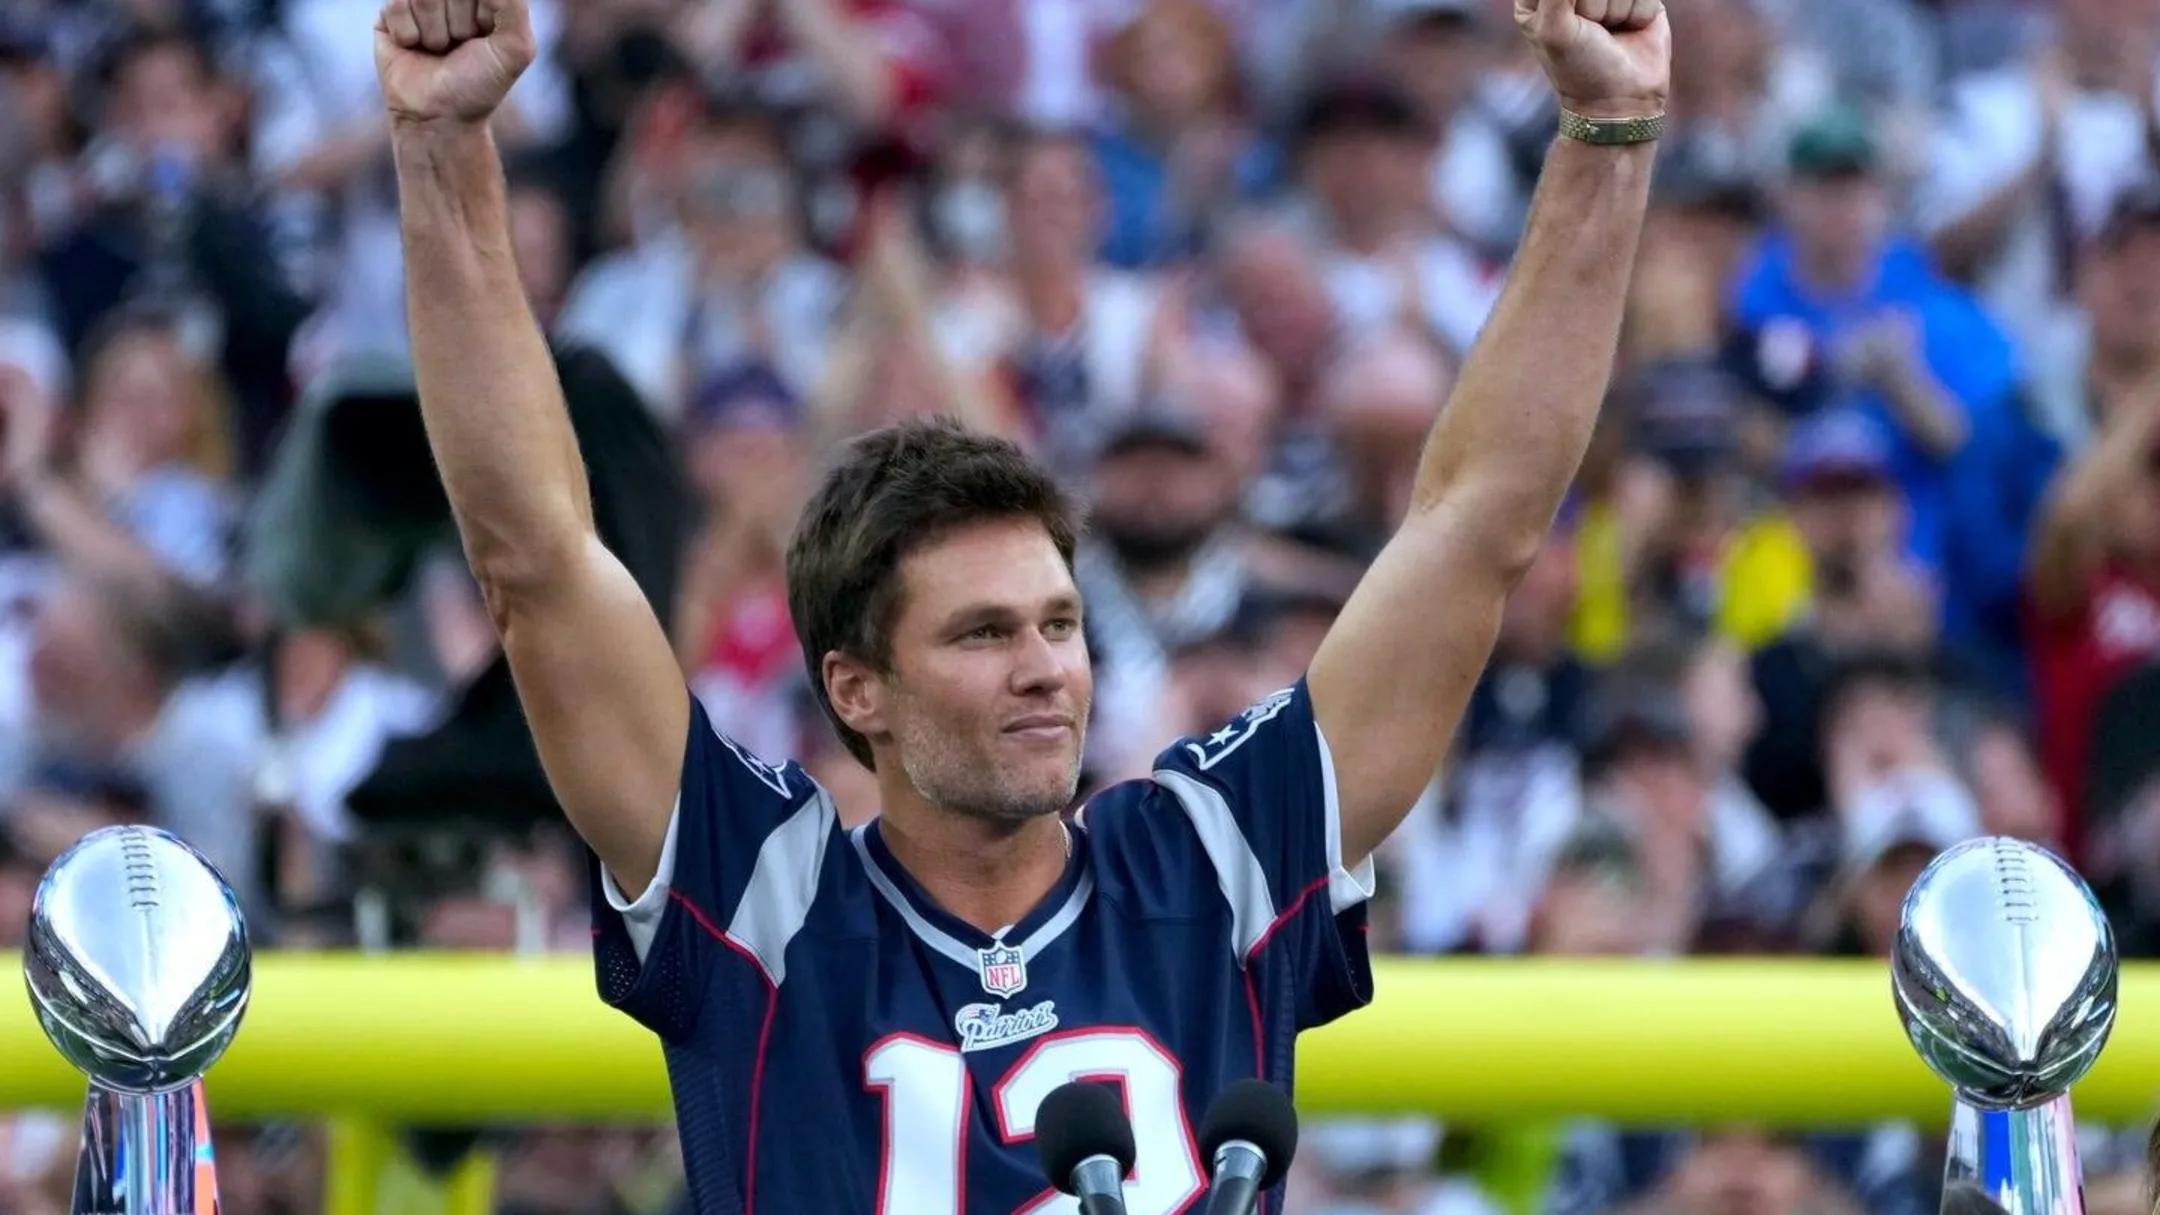 NFL News: Could Tom Brady Switch Gears to Coaching? Exciting Talks with New England Patriots Hint at Possible New Role